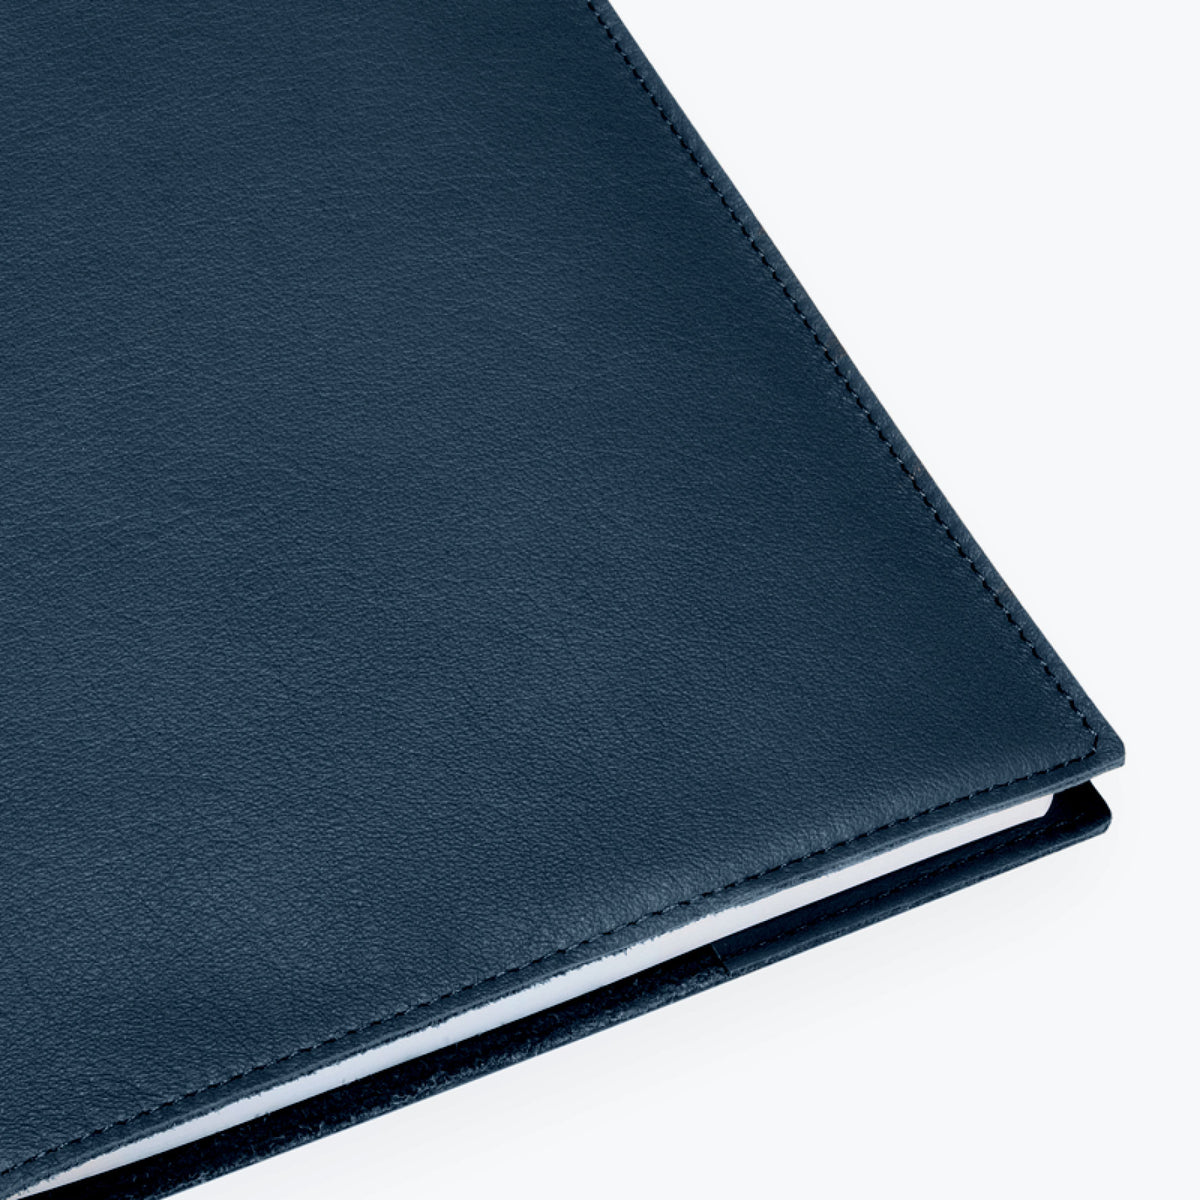 Bookbinders Design - Notebook - Leather - A4 - Navy